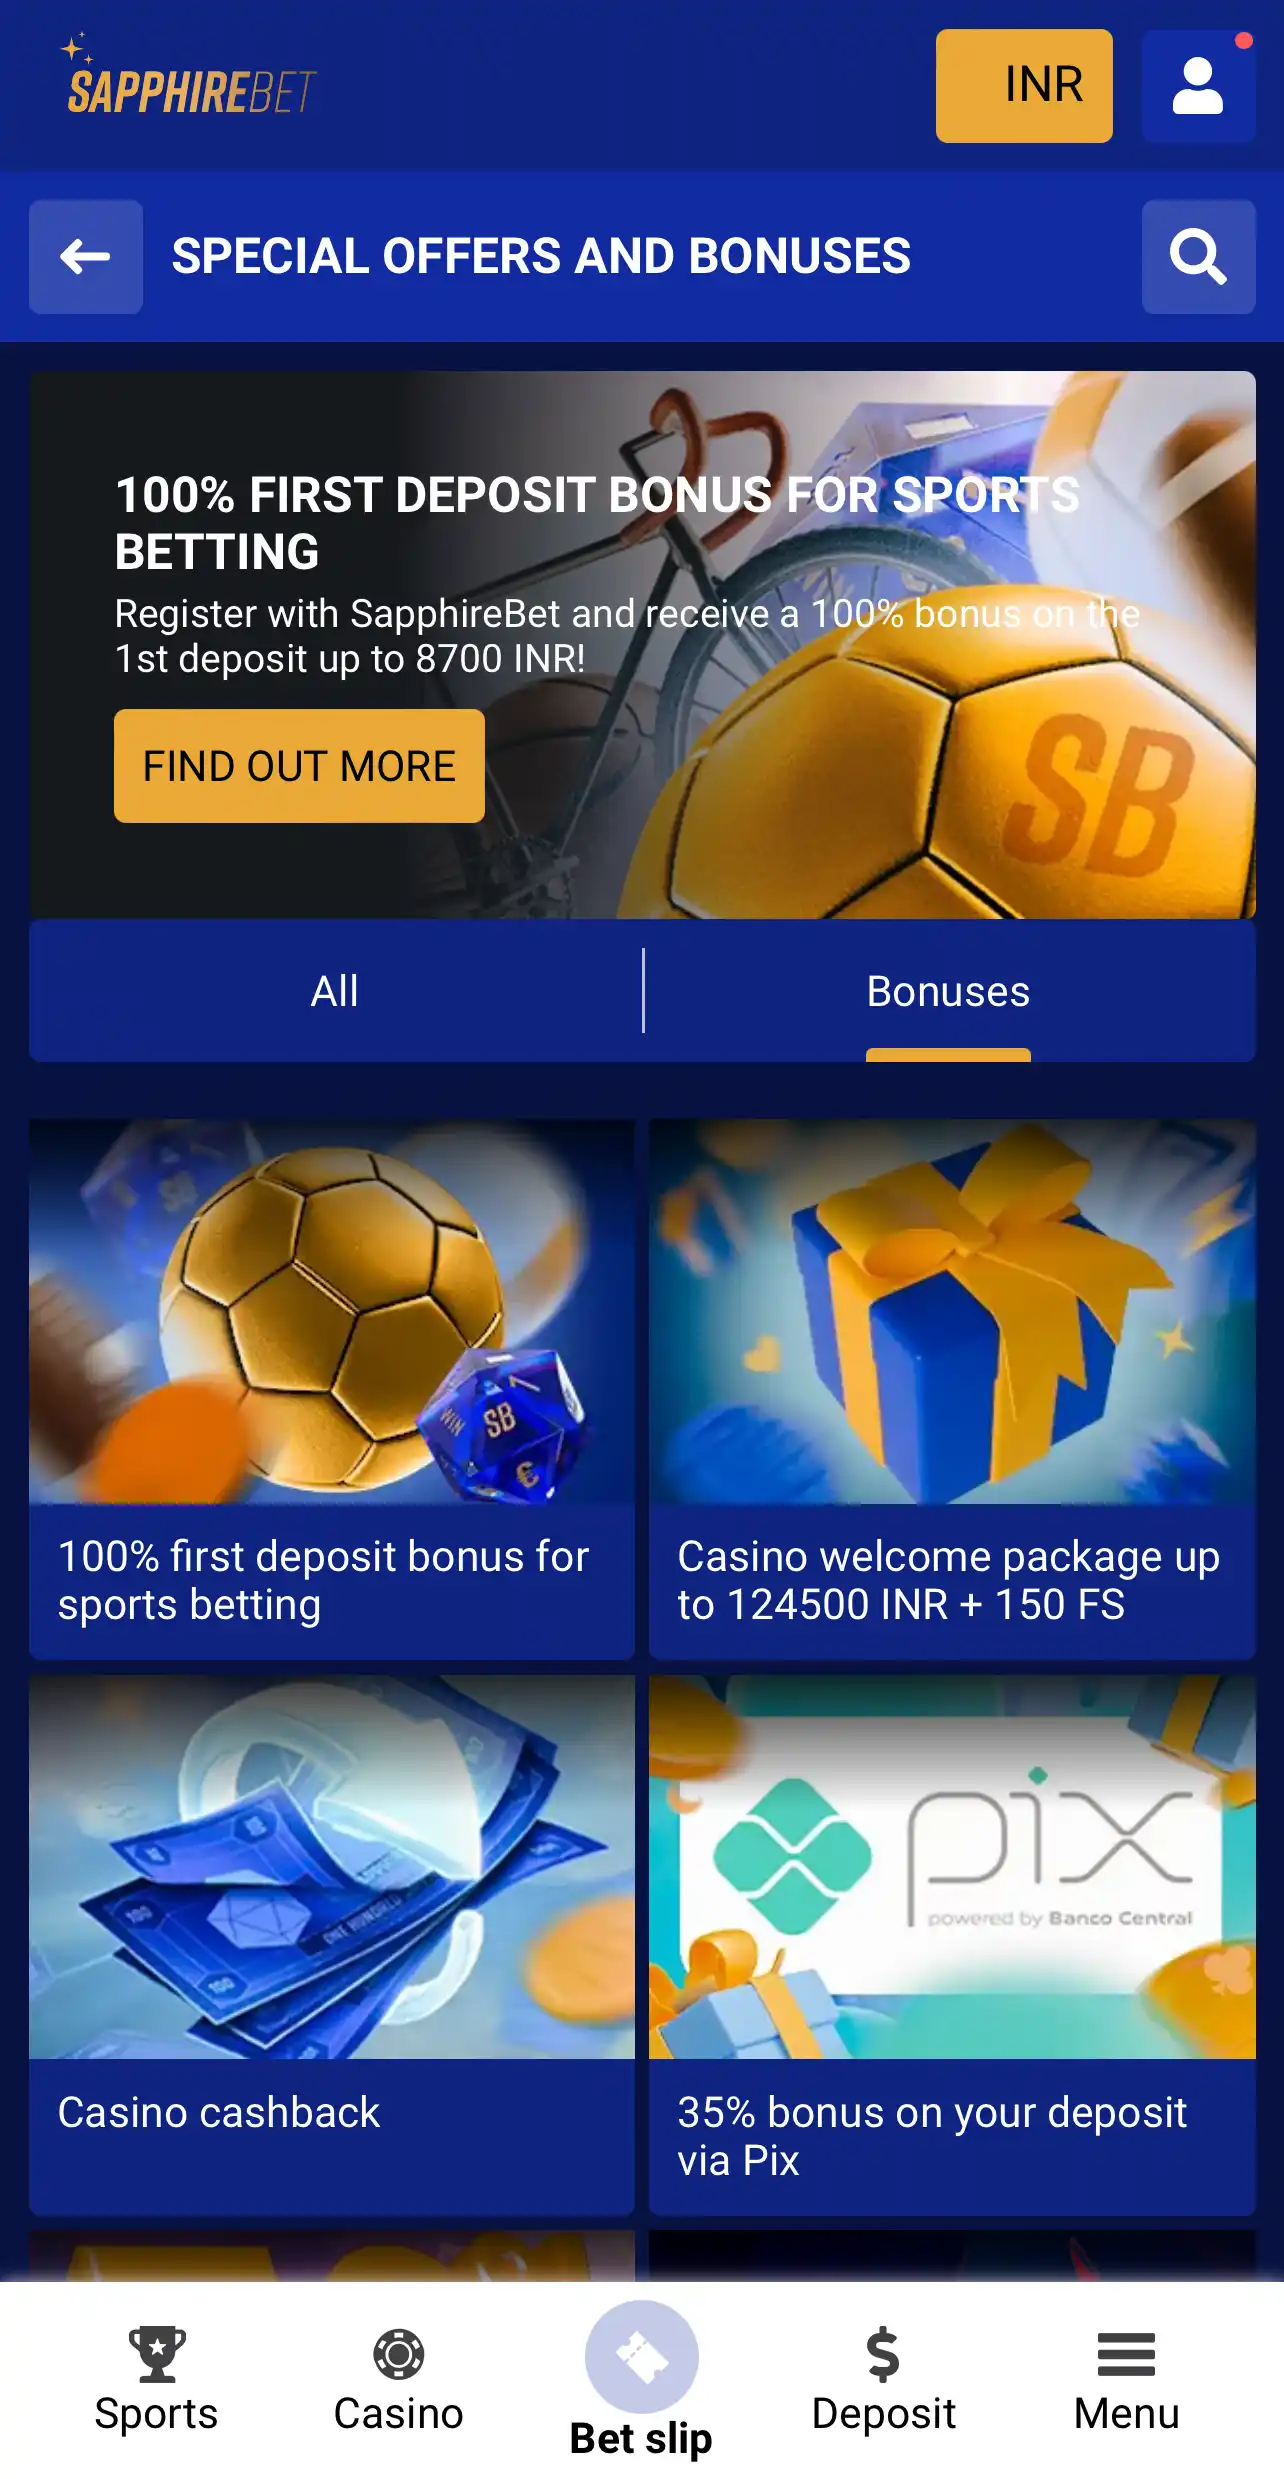 SapphireBet gives bonuses to all players after registering.